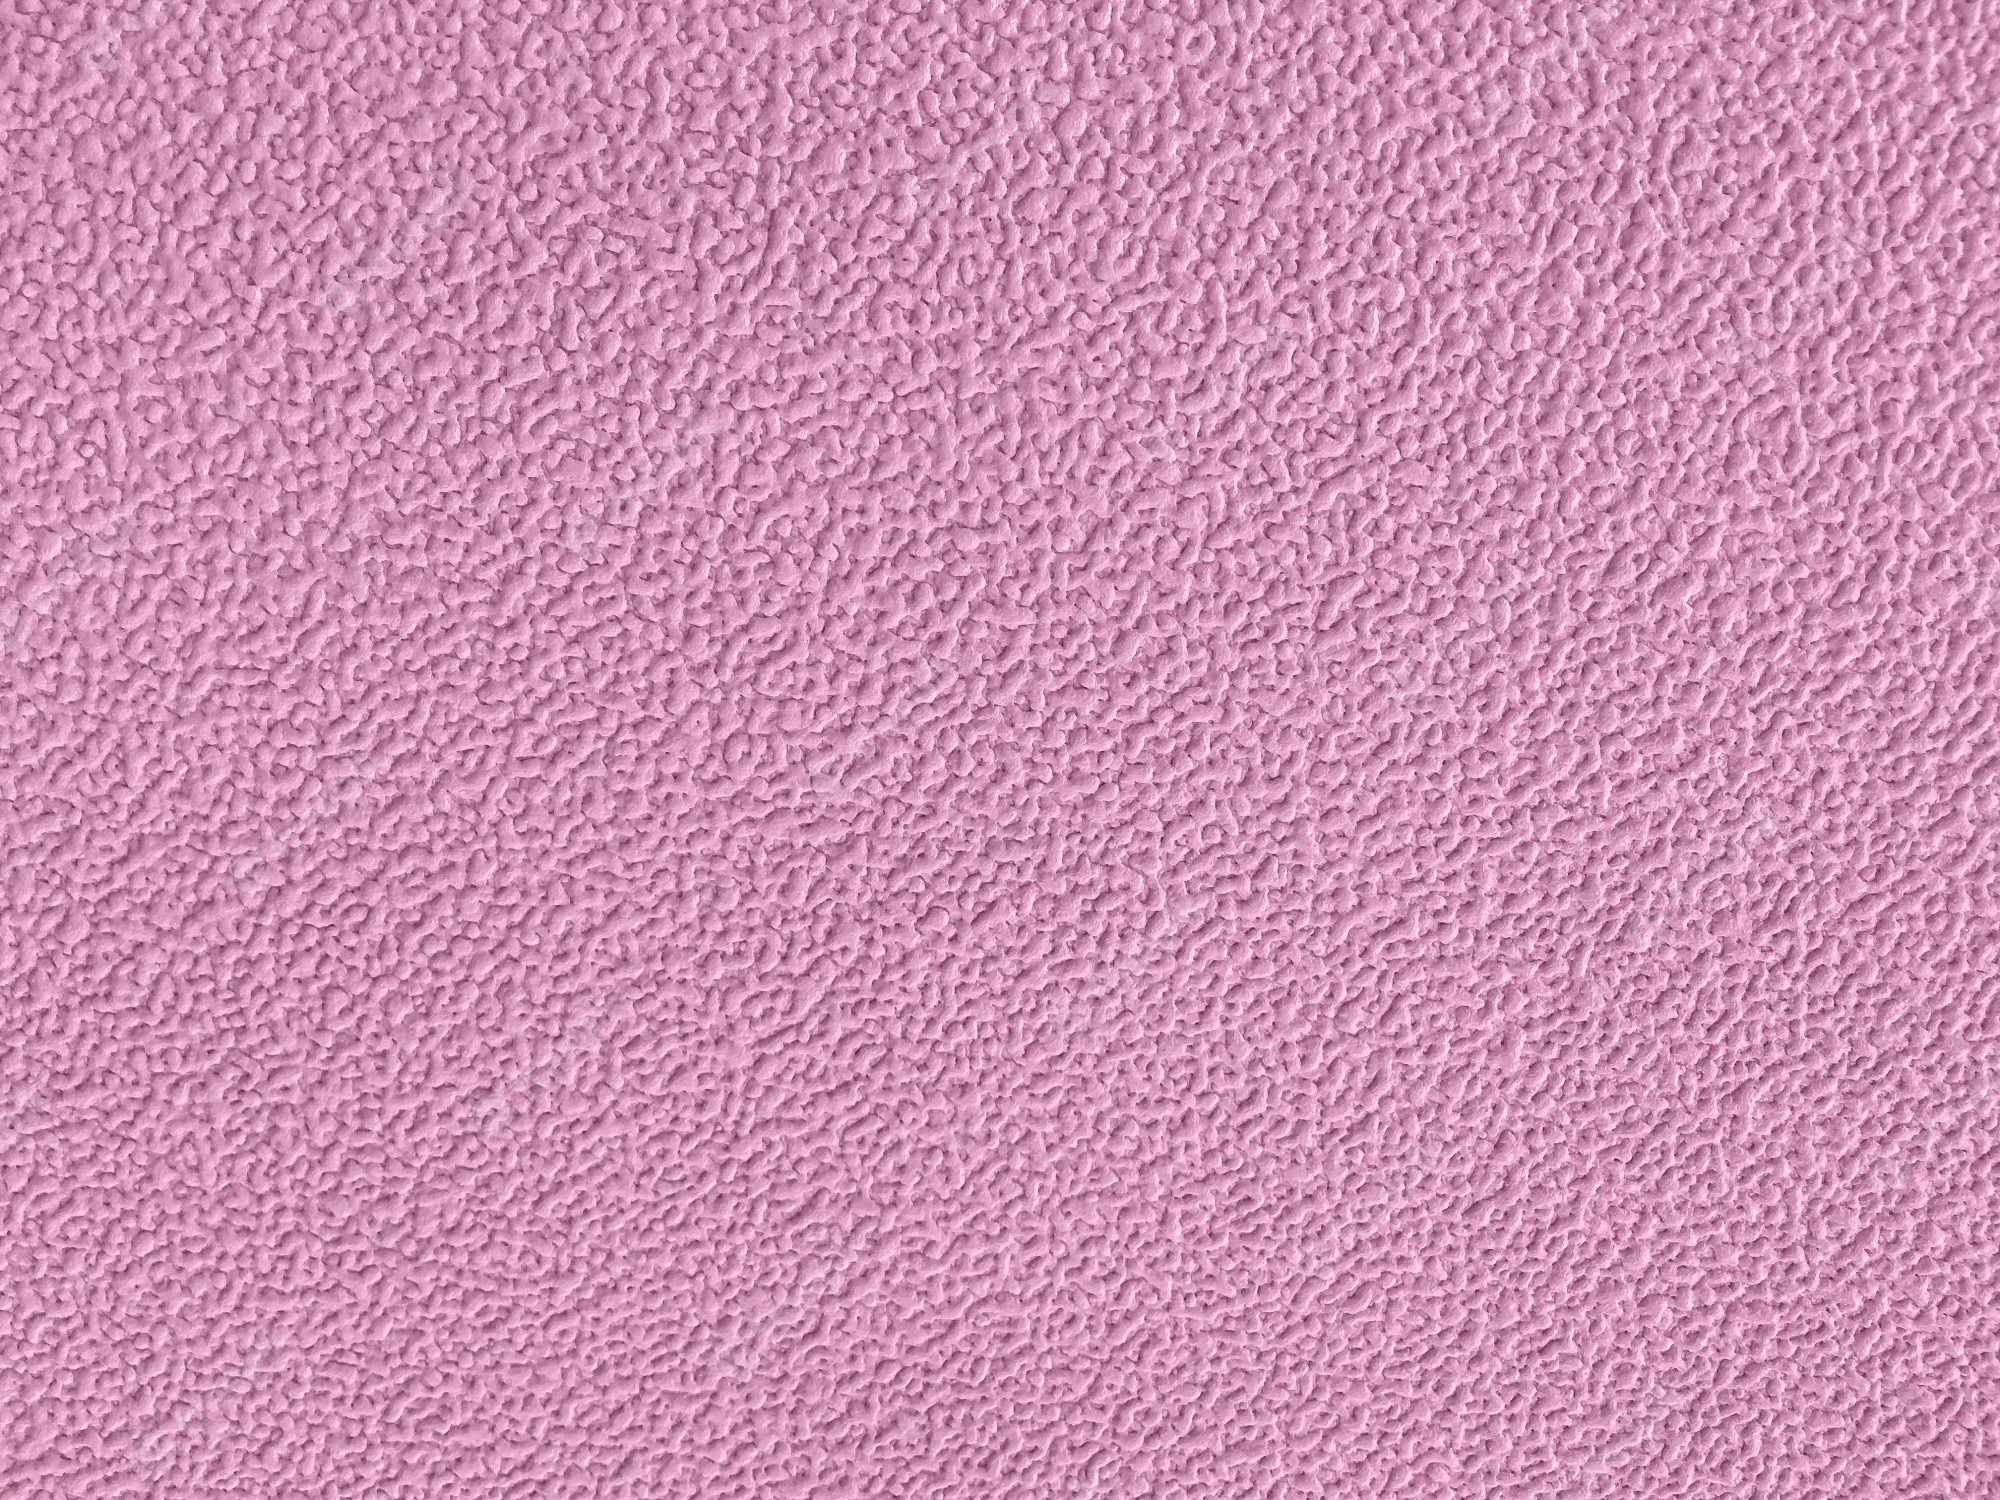 Premium Photo. Texture of light pink wallpaper with a pattern